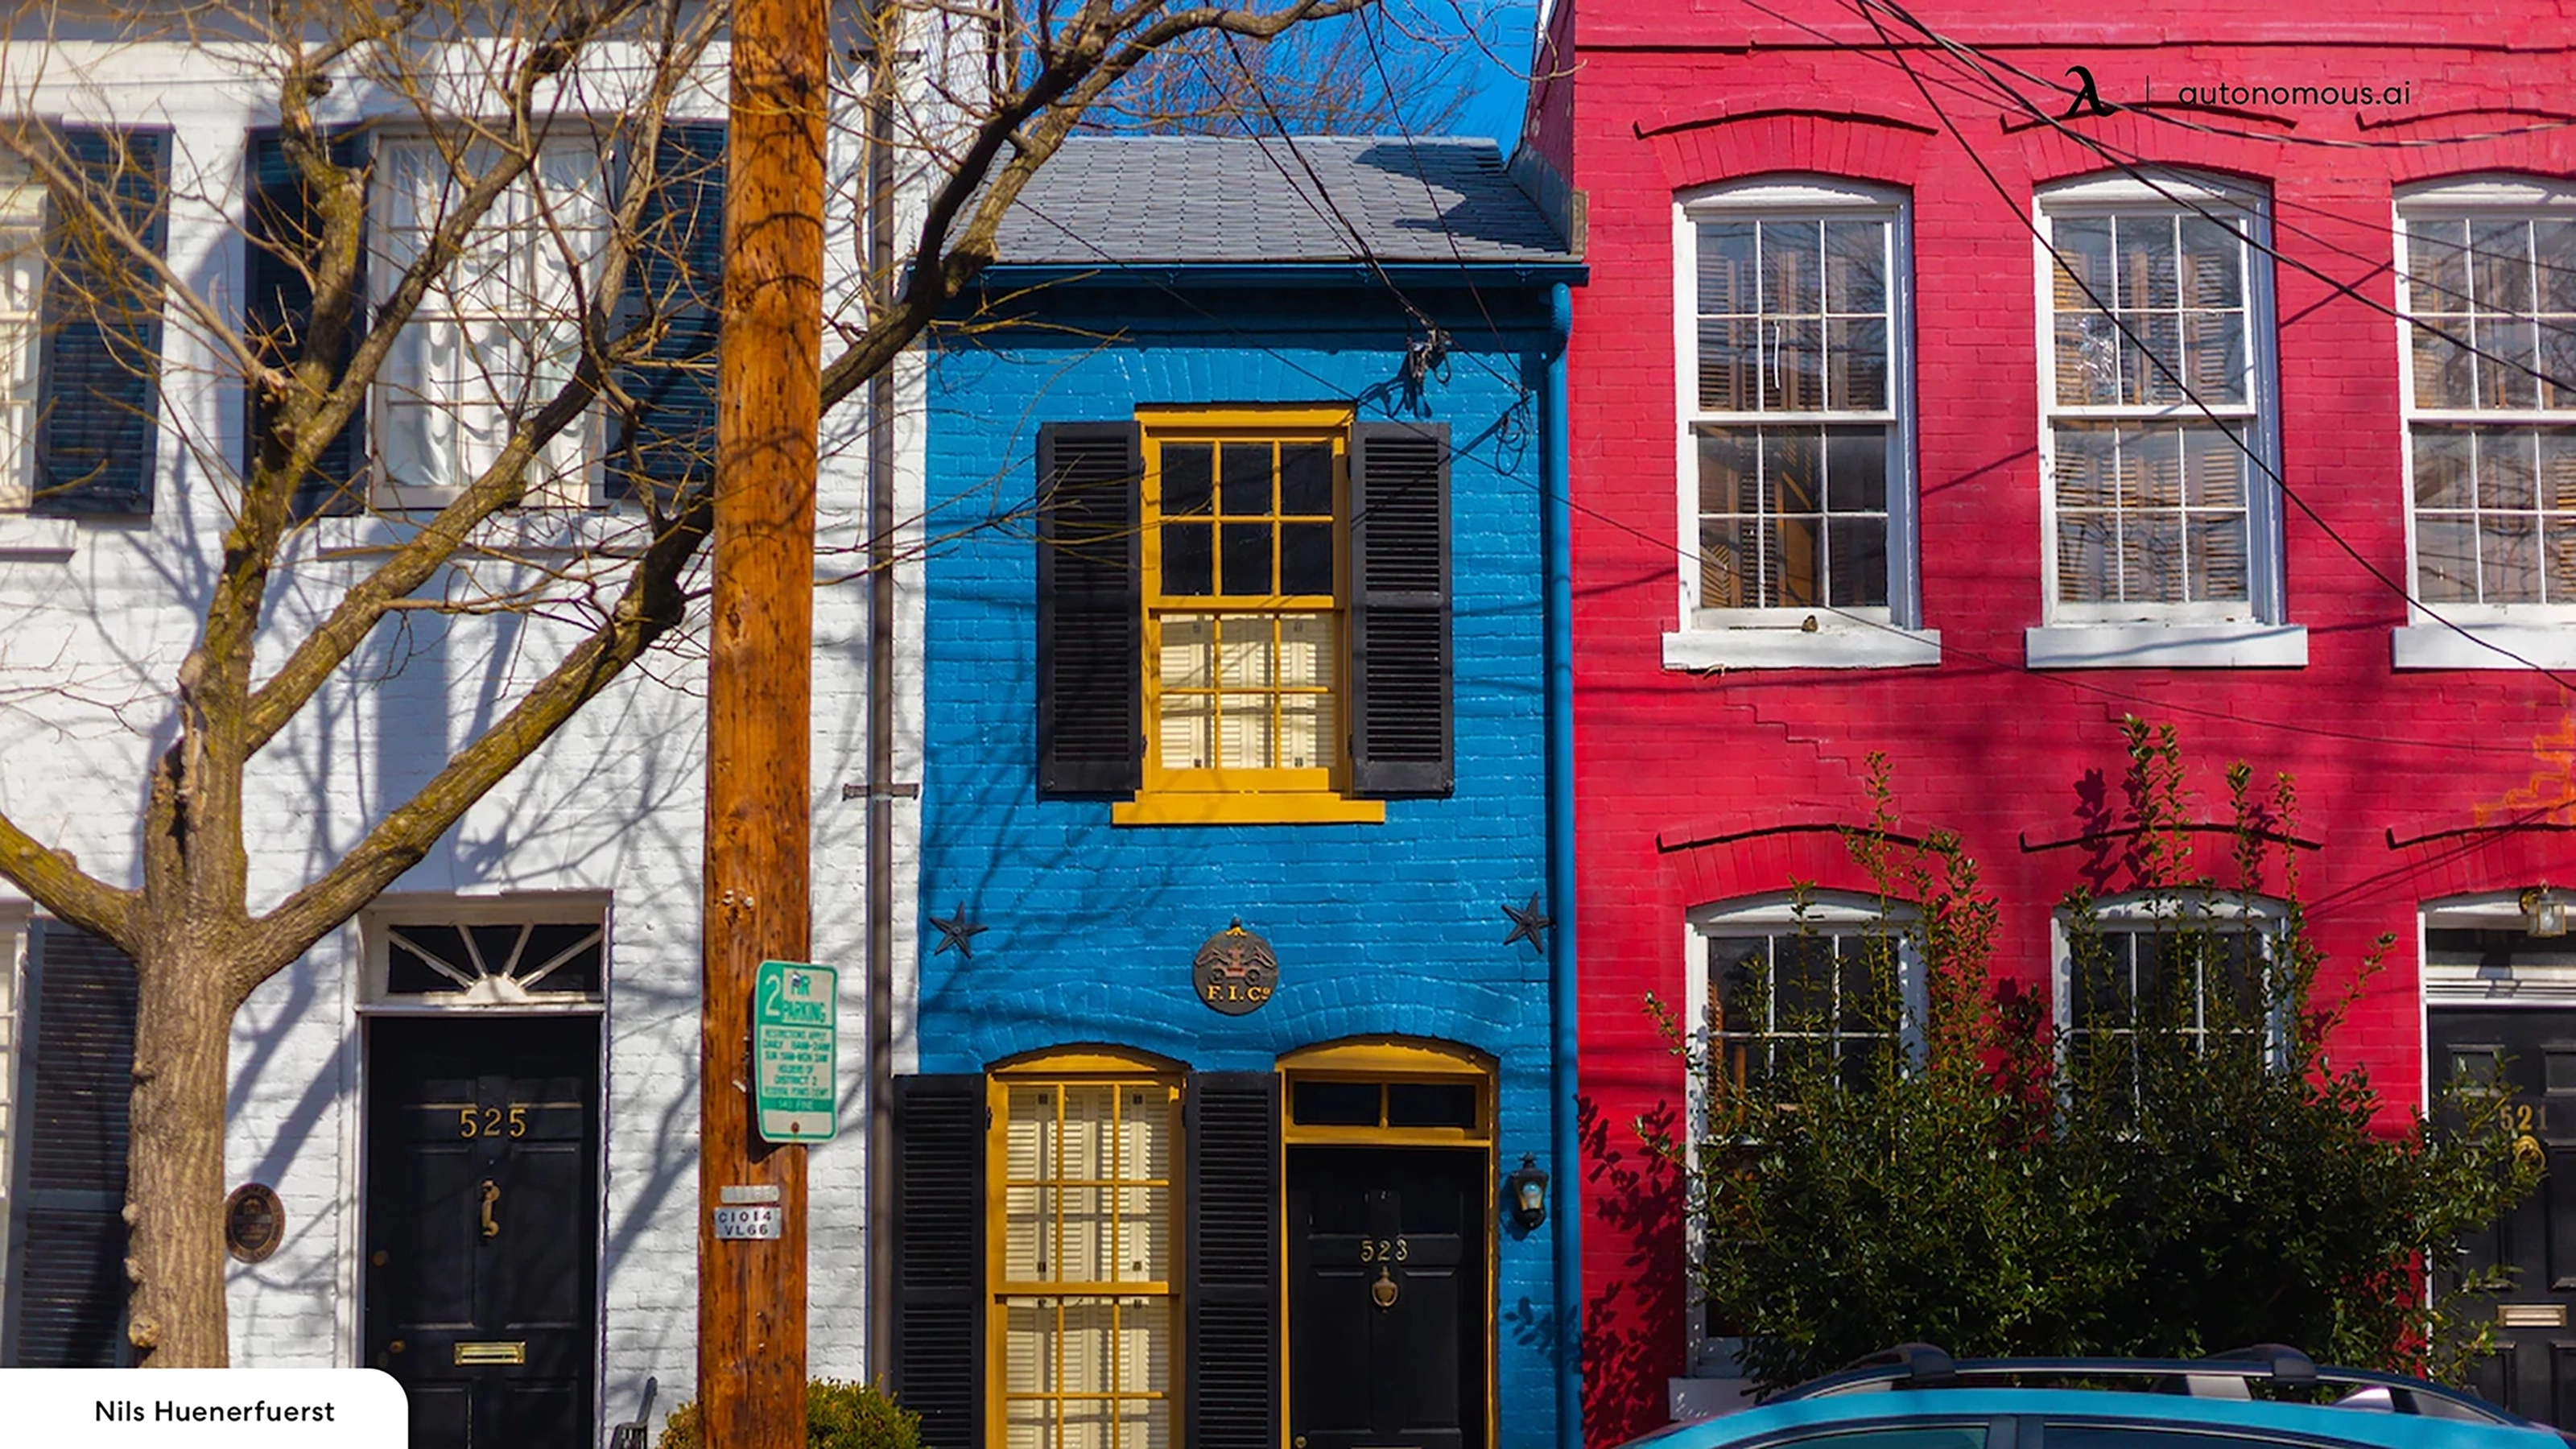 The Art of Spite Houses: Architectural Wonders